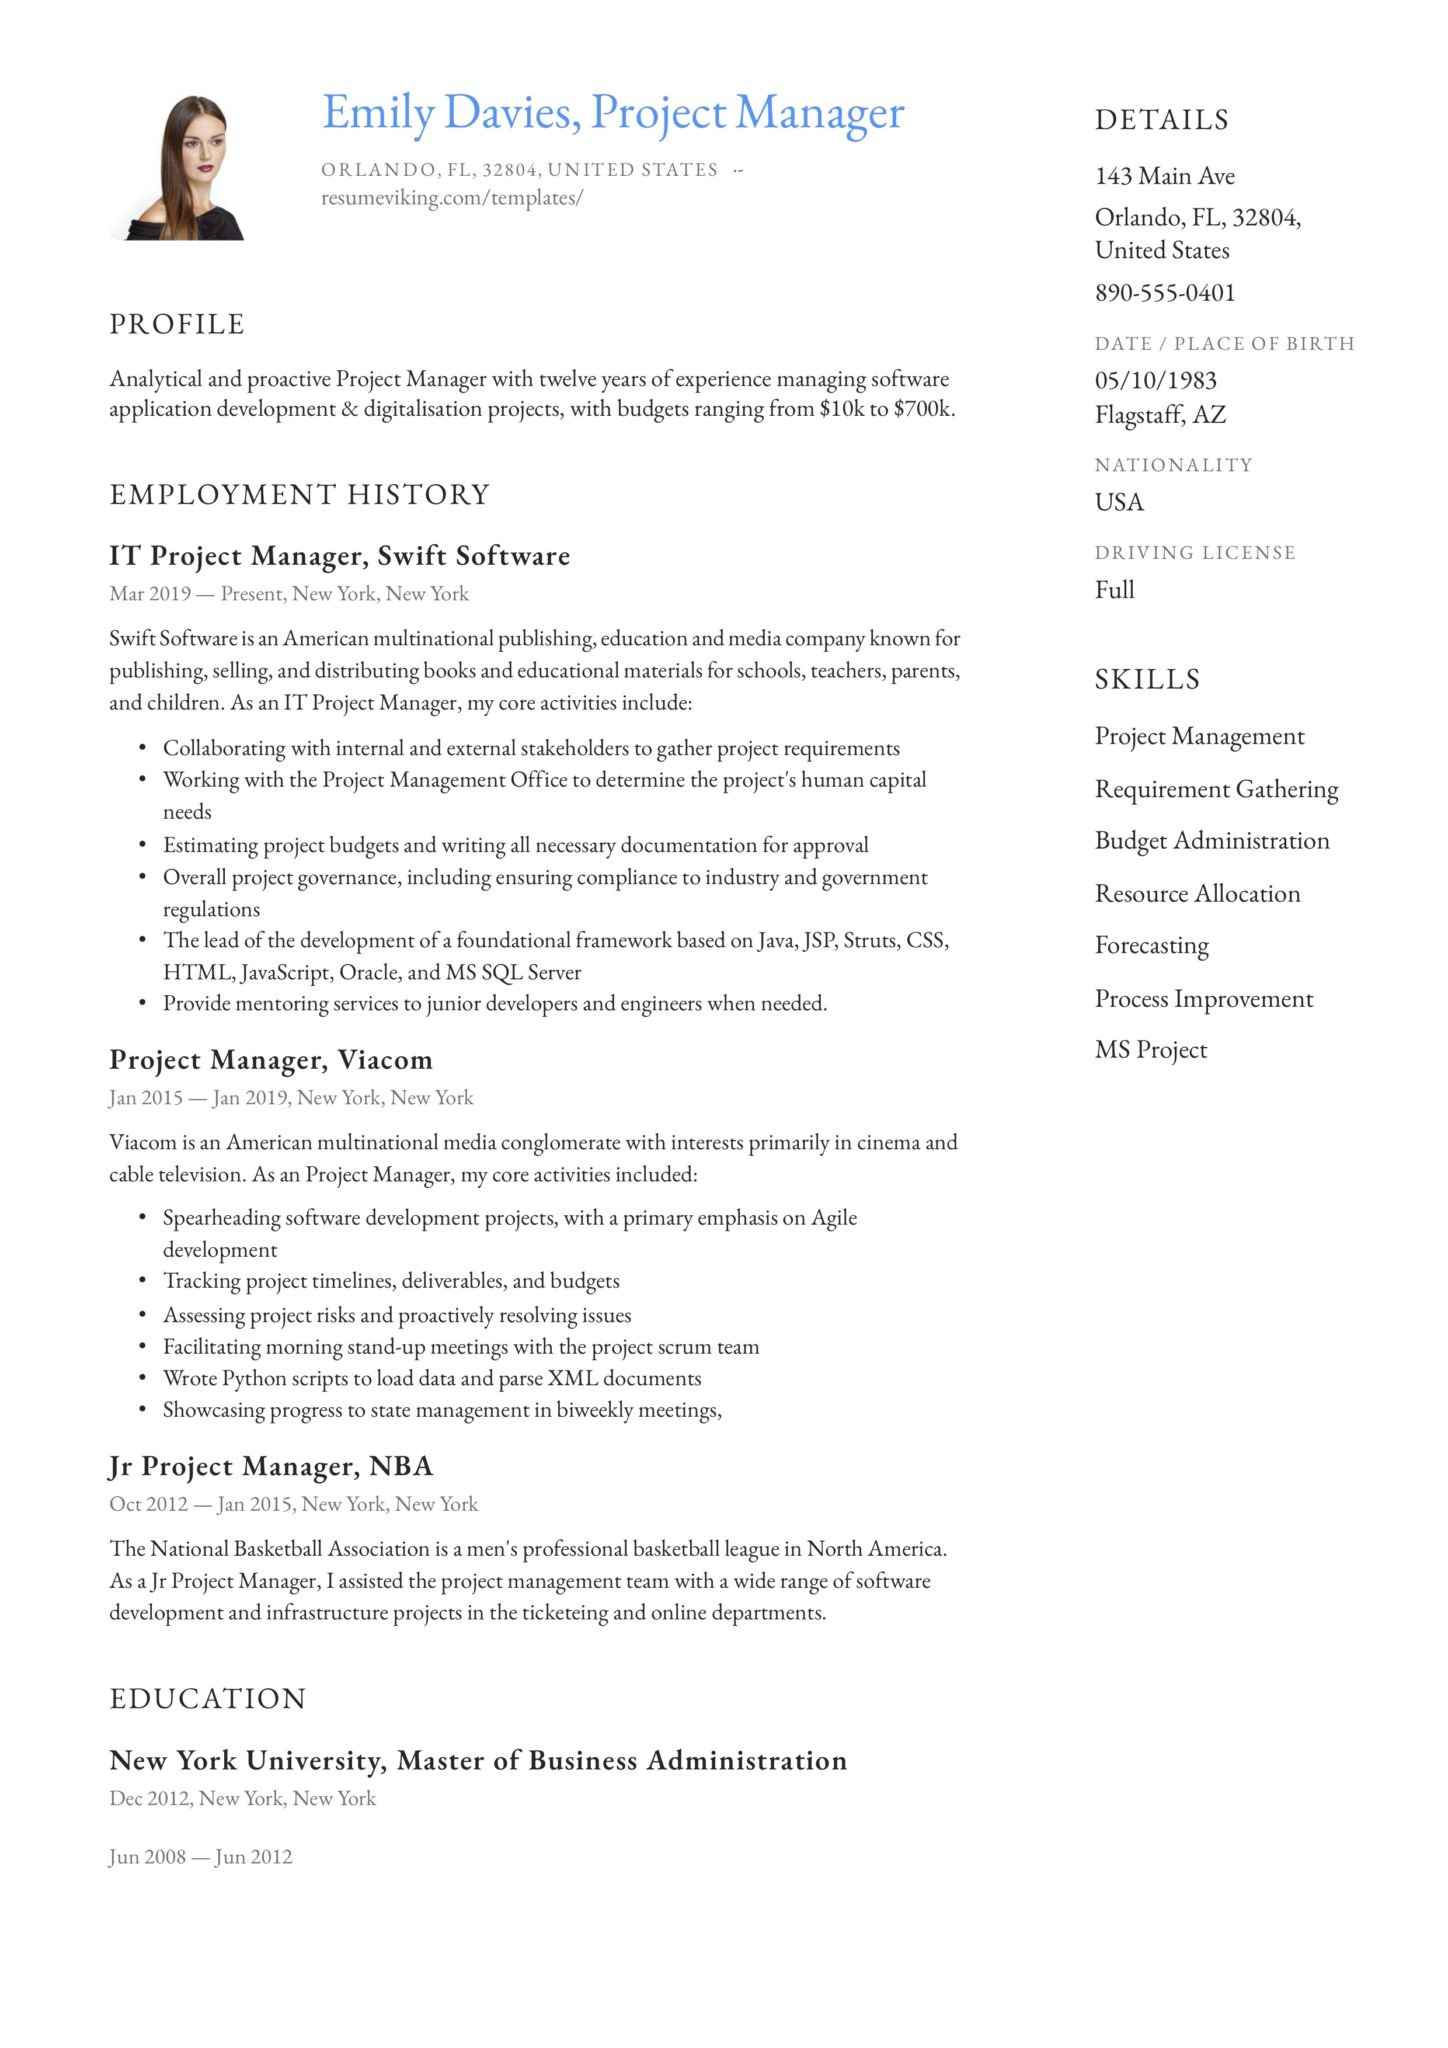 Federal Program Manager Sample Resum E 20 Project Manager Resume Examples & Full Guide Pdf & Word 2021